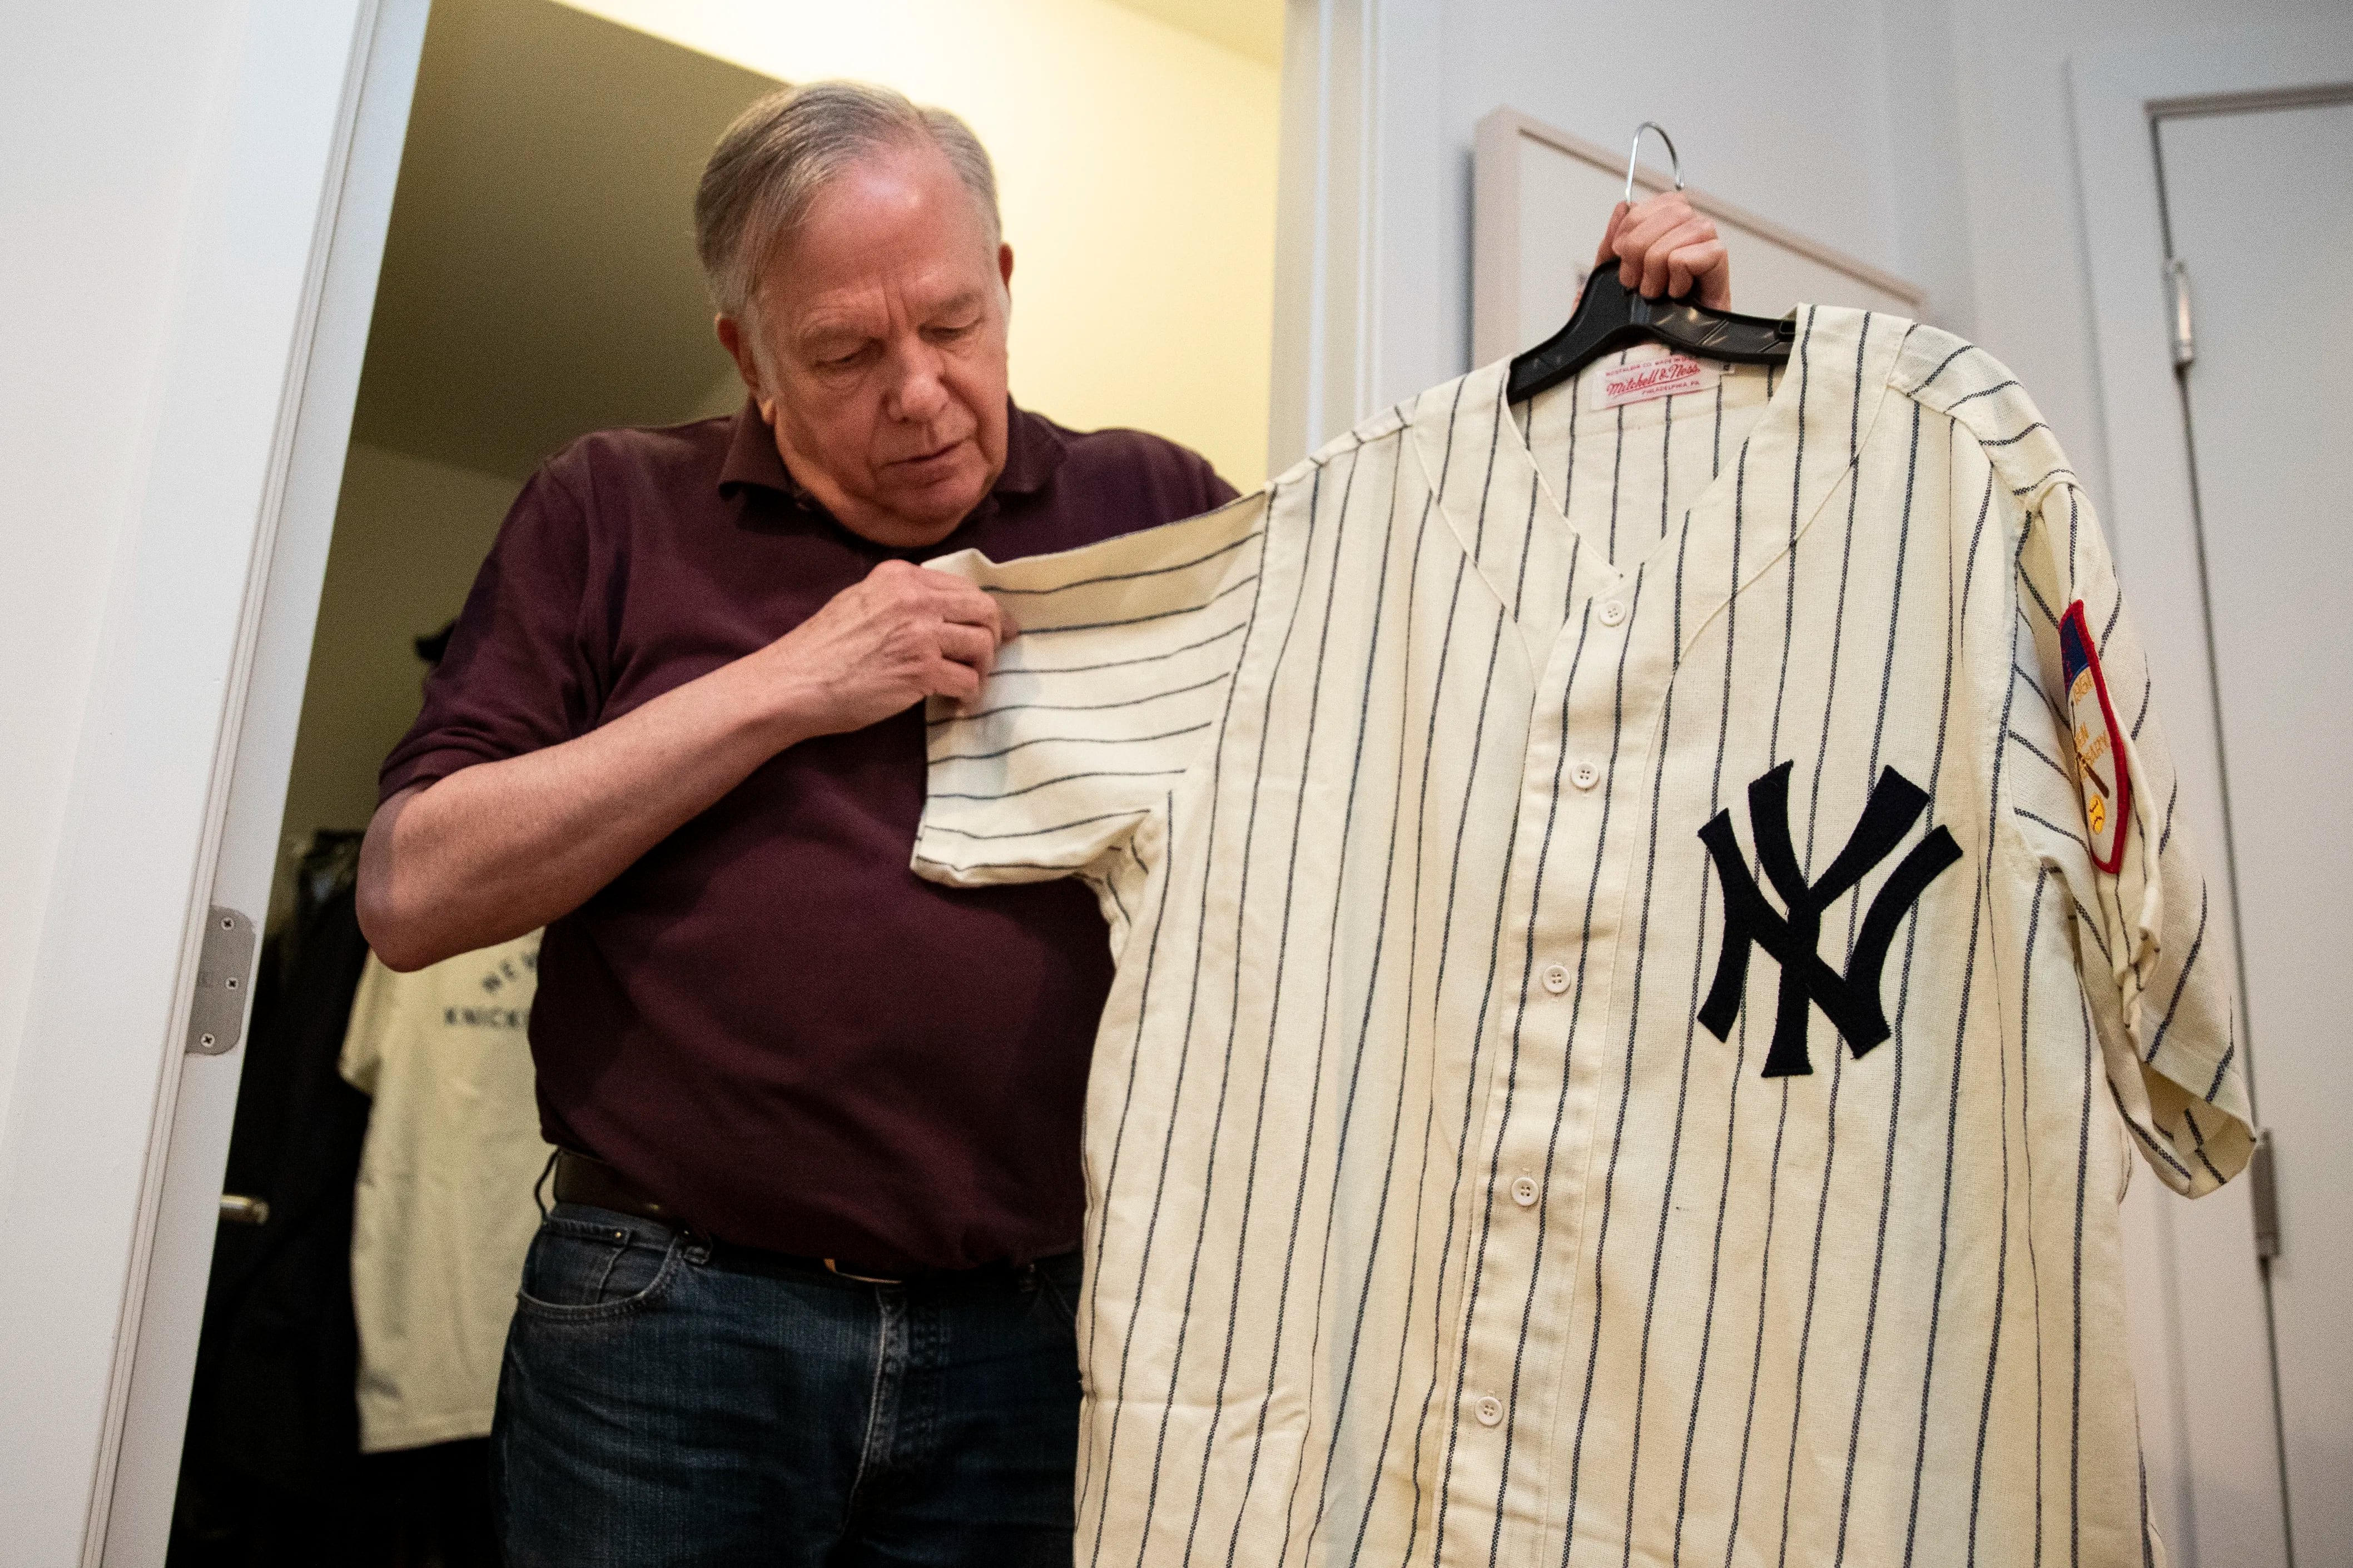 Mitchell & Ness Authentic New York Yankees Mickey Mantle Jersey